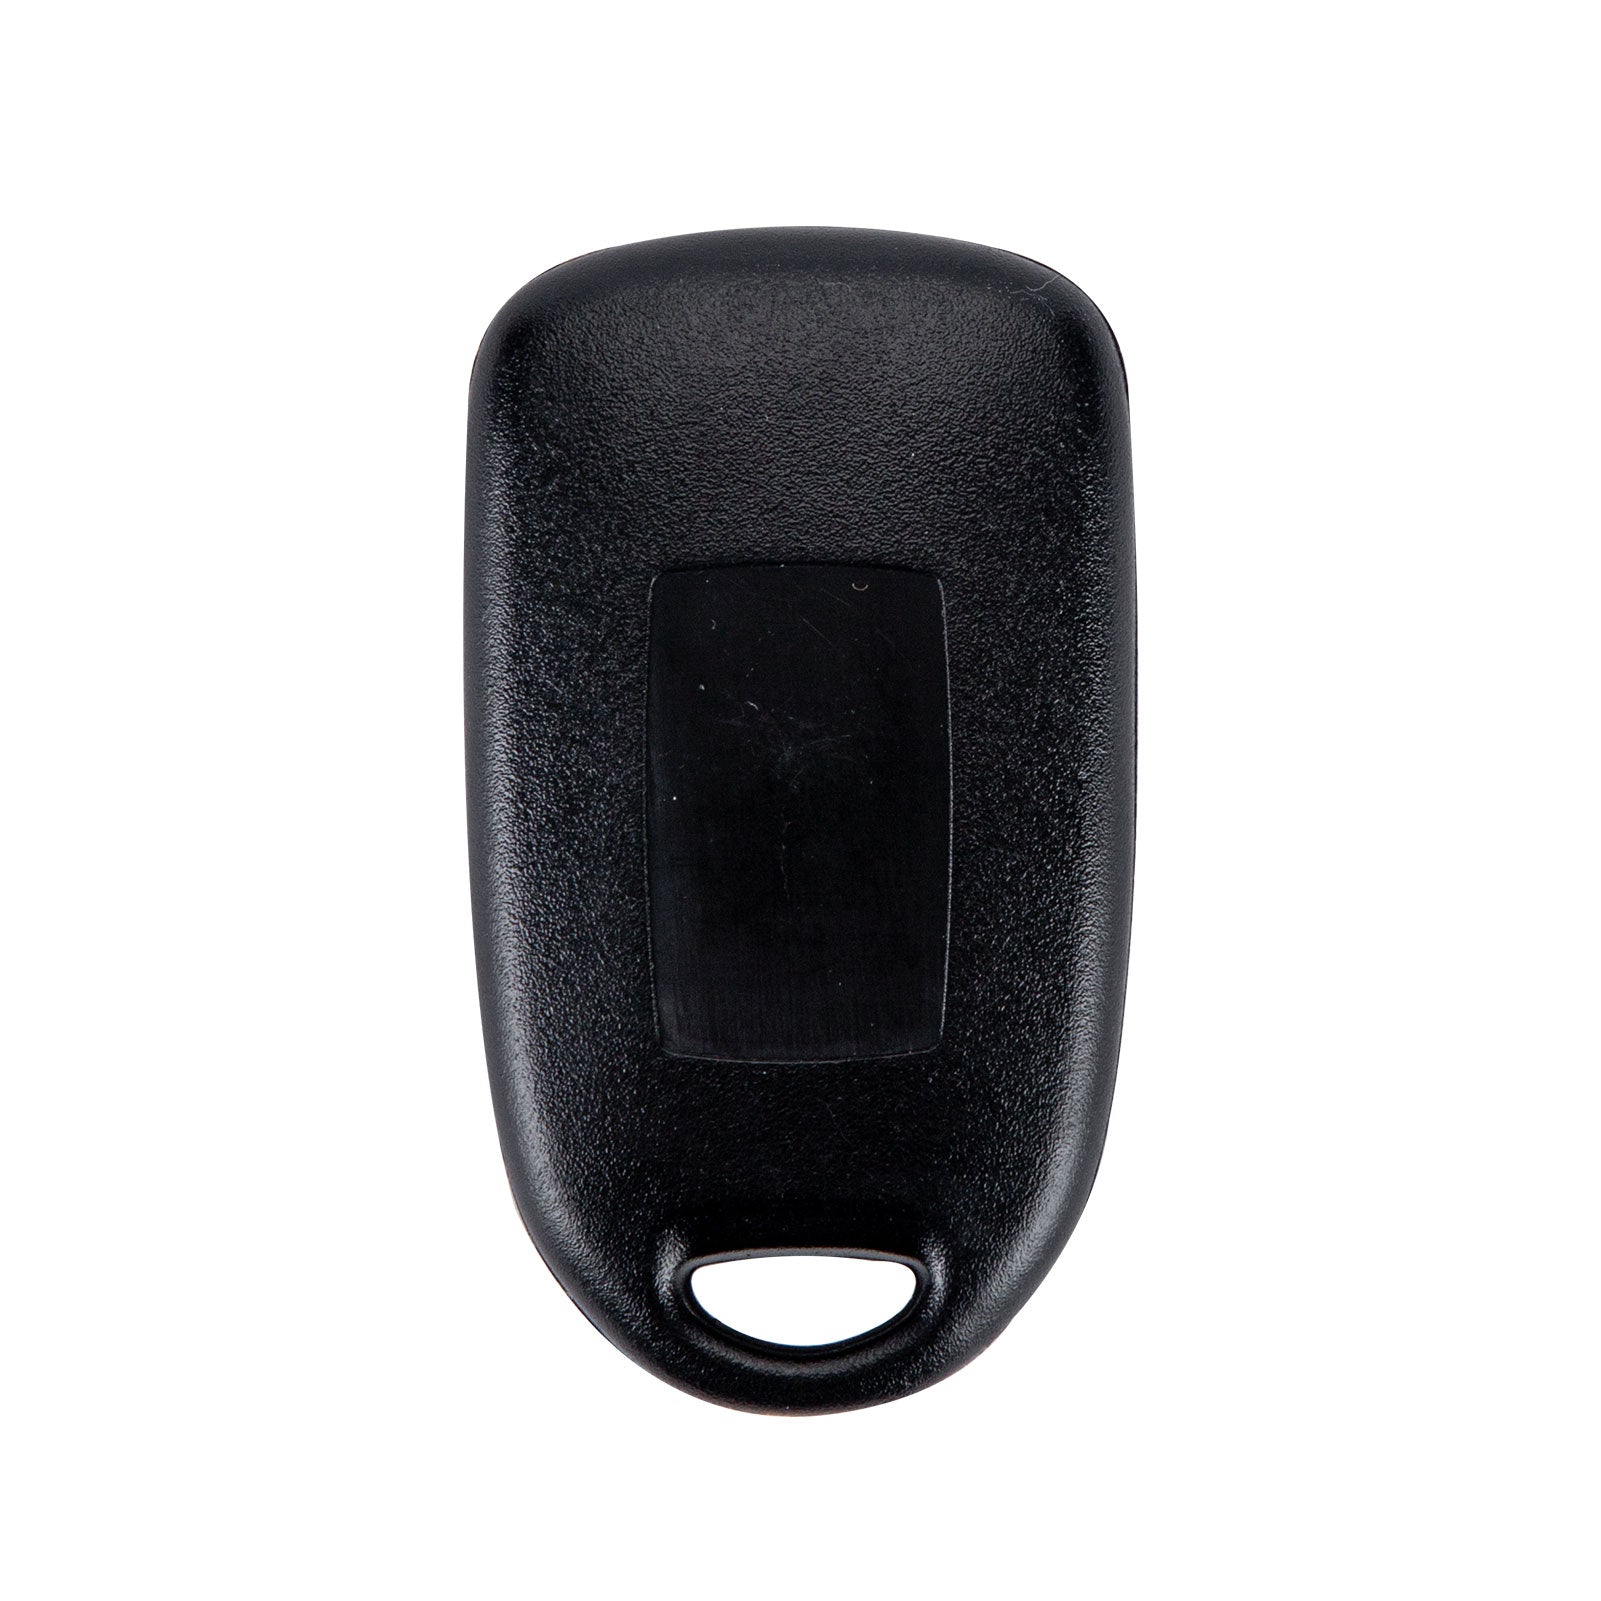 Extra-Partss Car Remote Fob Replacement for KPU41805 4238A-12076 fits 2003 2004 2005 Mazda 6